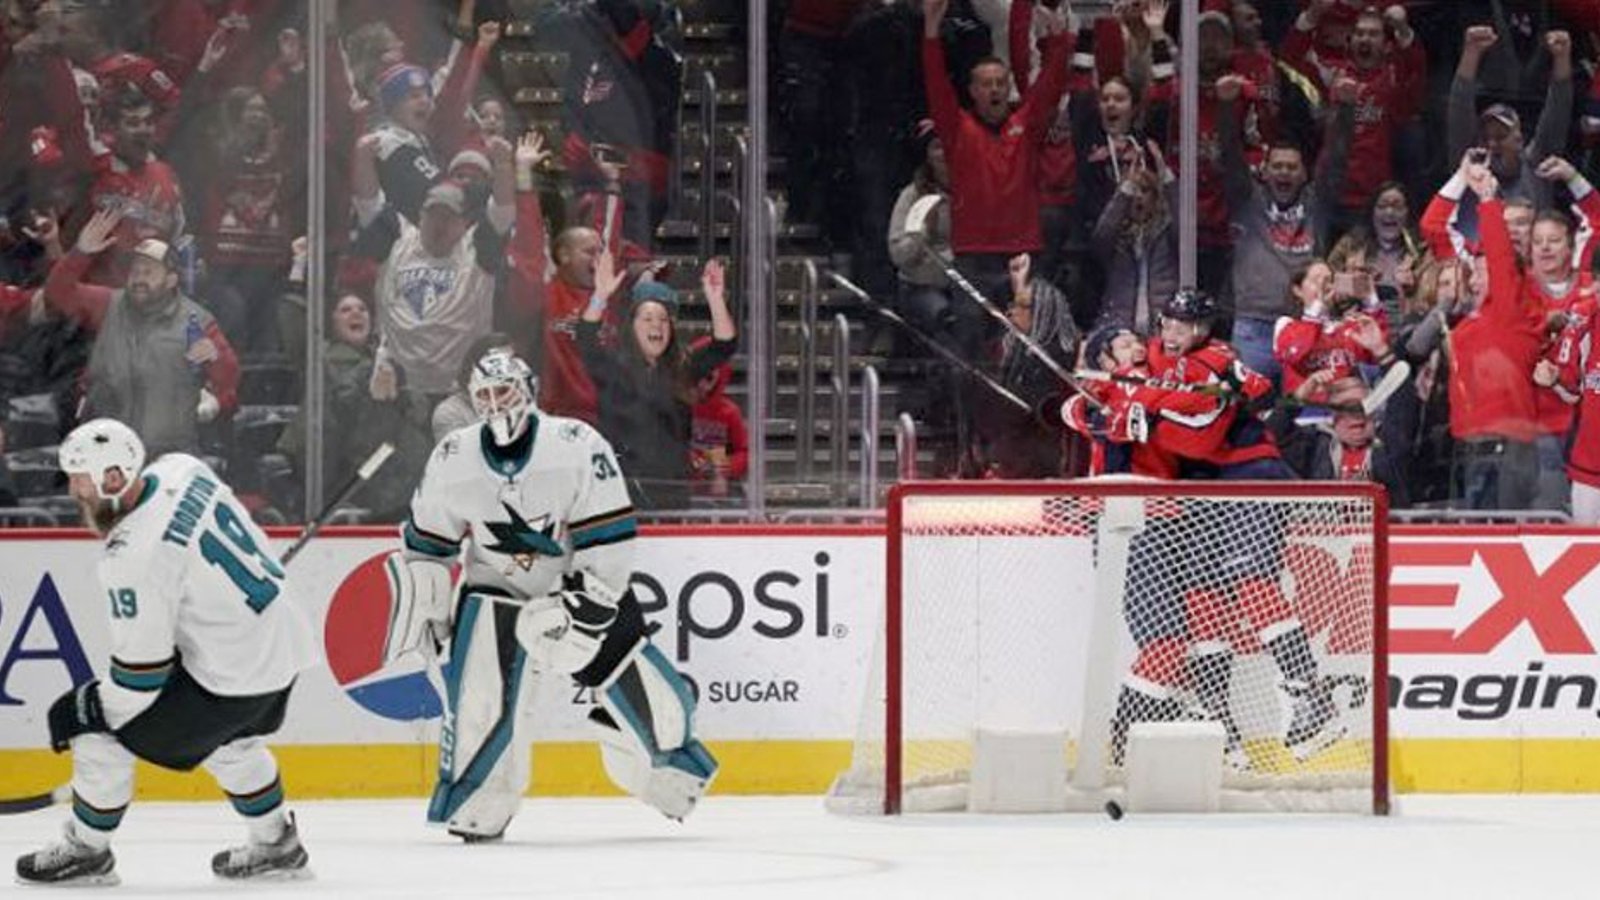 Sharks set a pathetic new NHL record with loss to Capitals